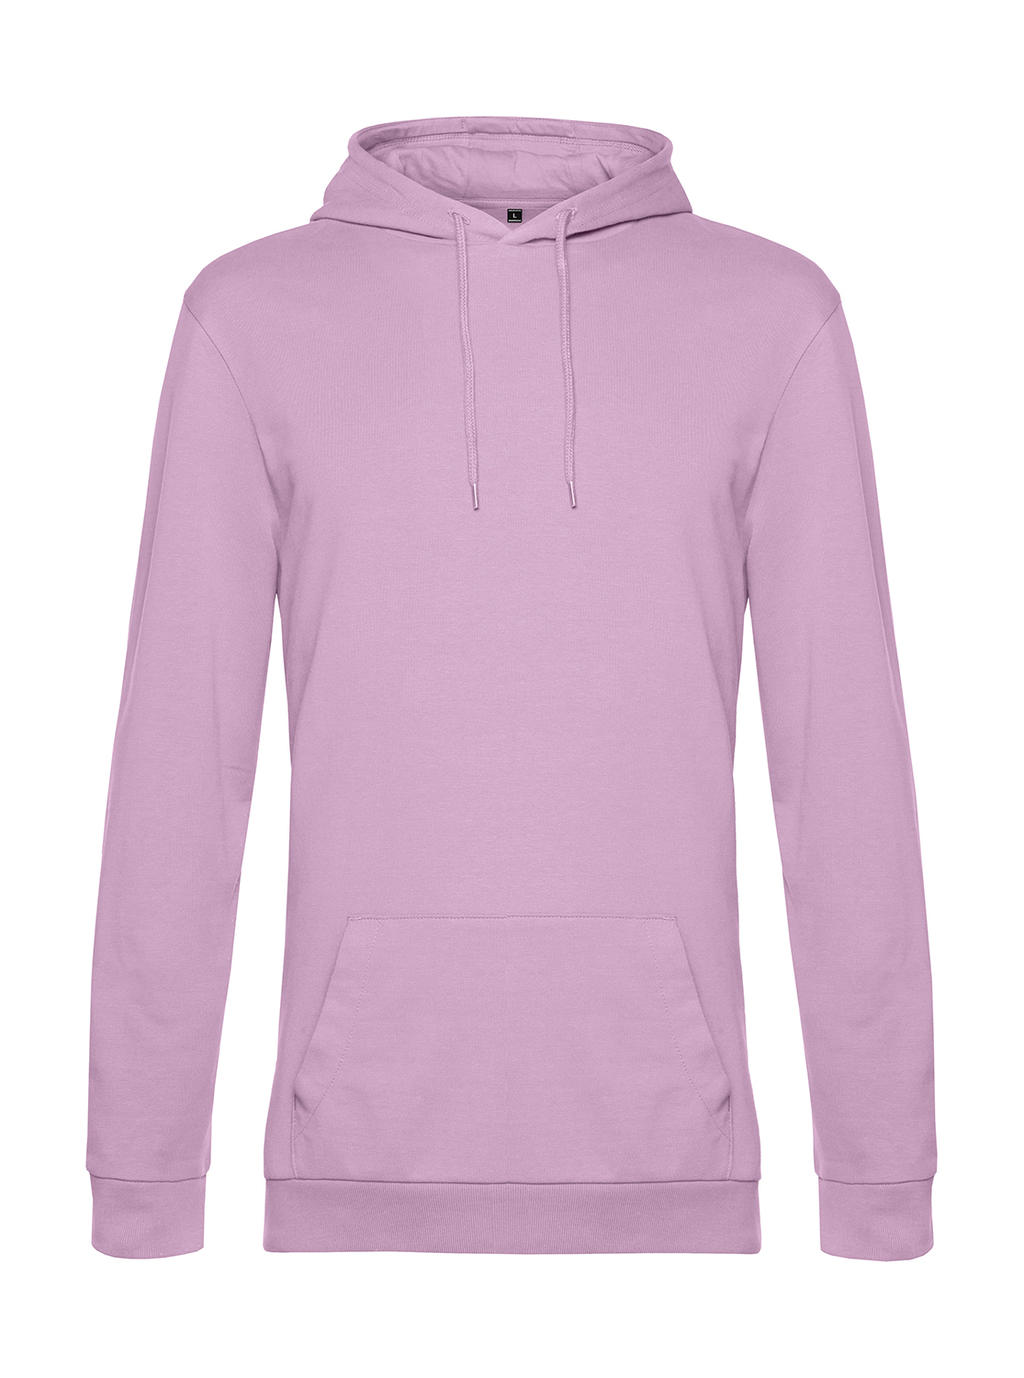  #Hoodie French Terry in Farbe Candy Pink